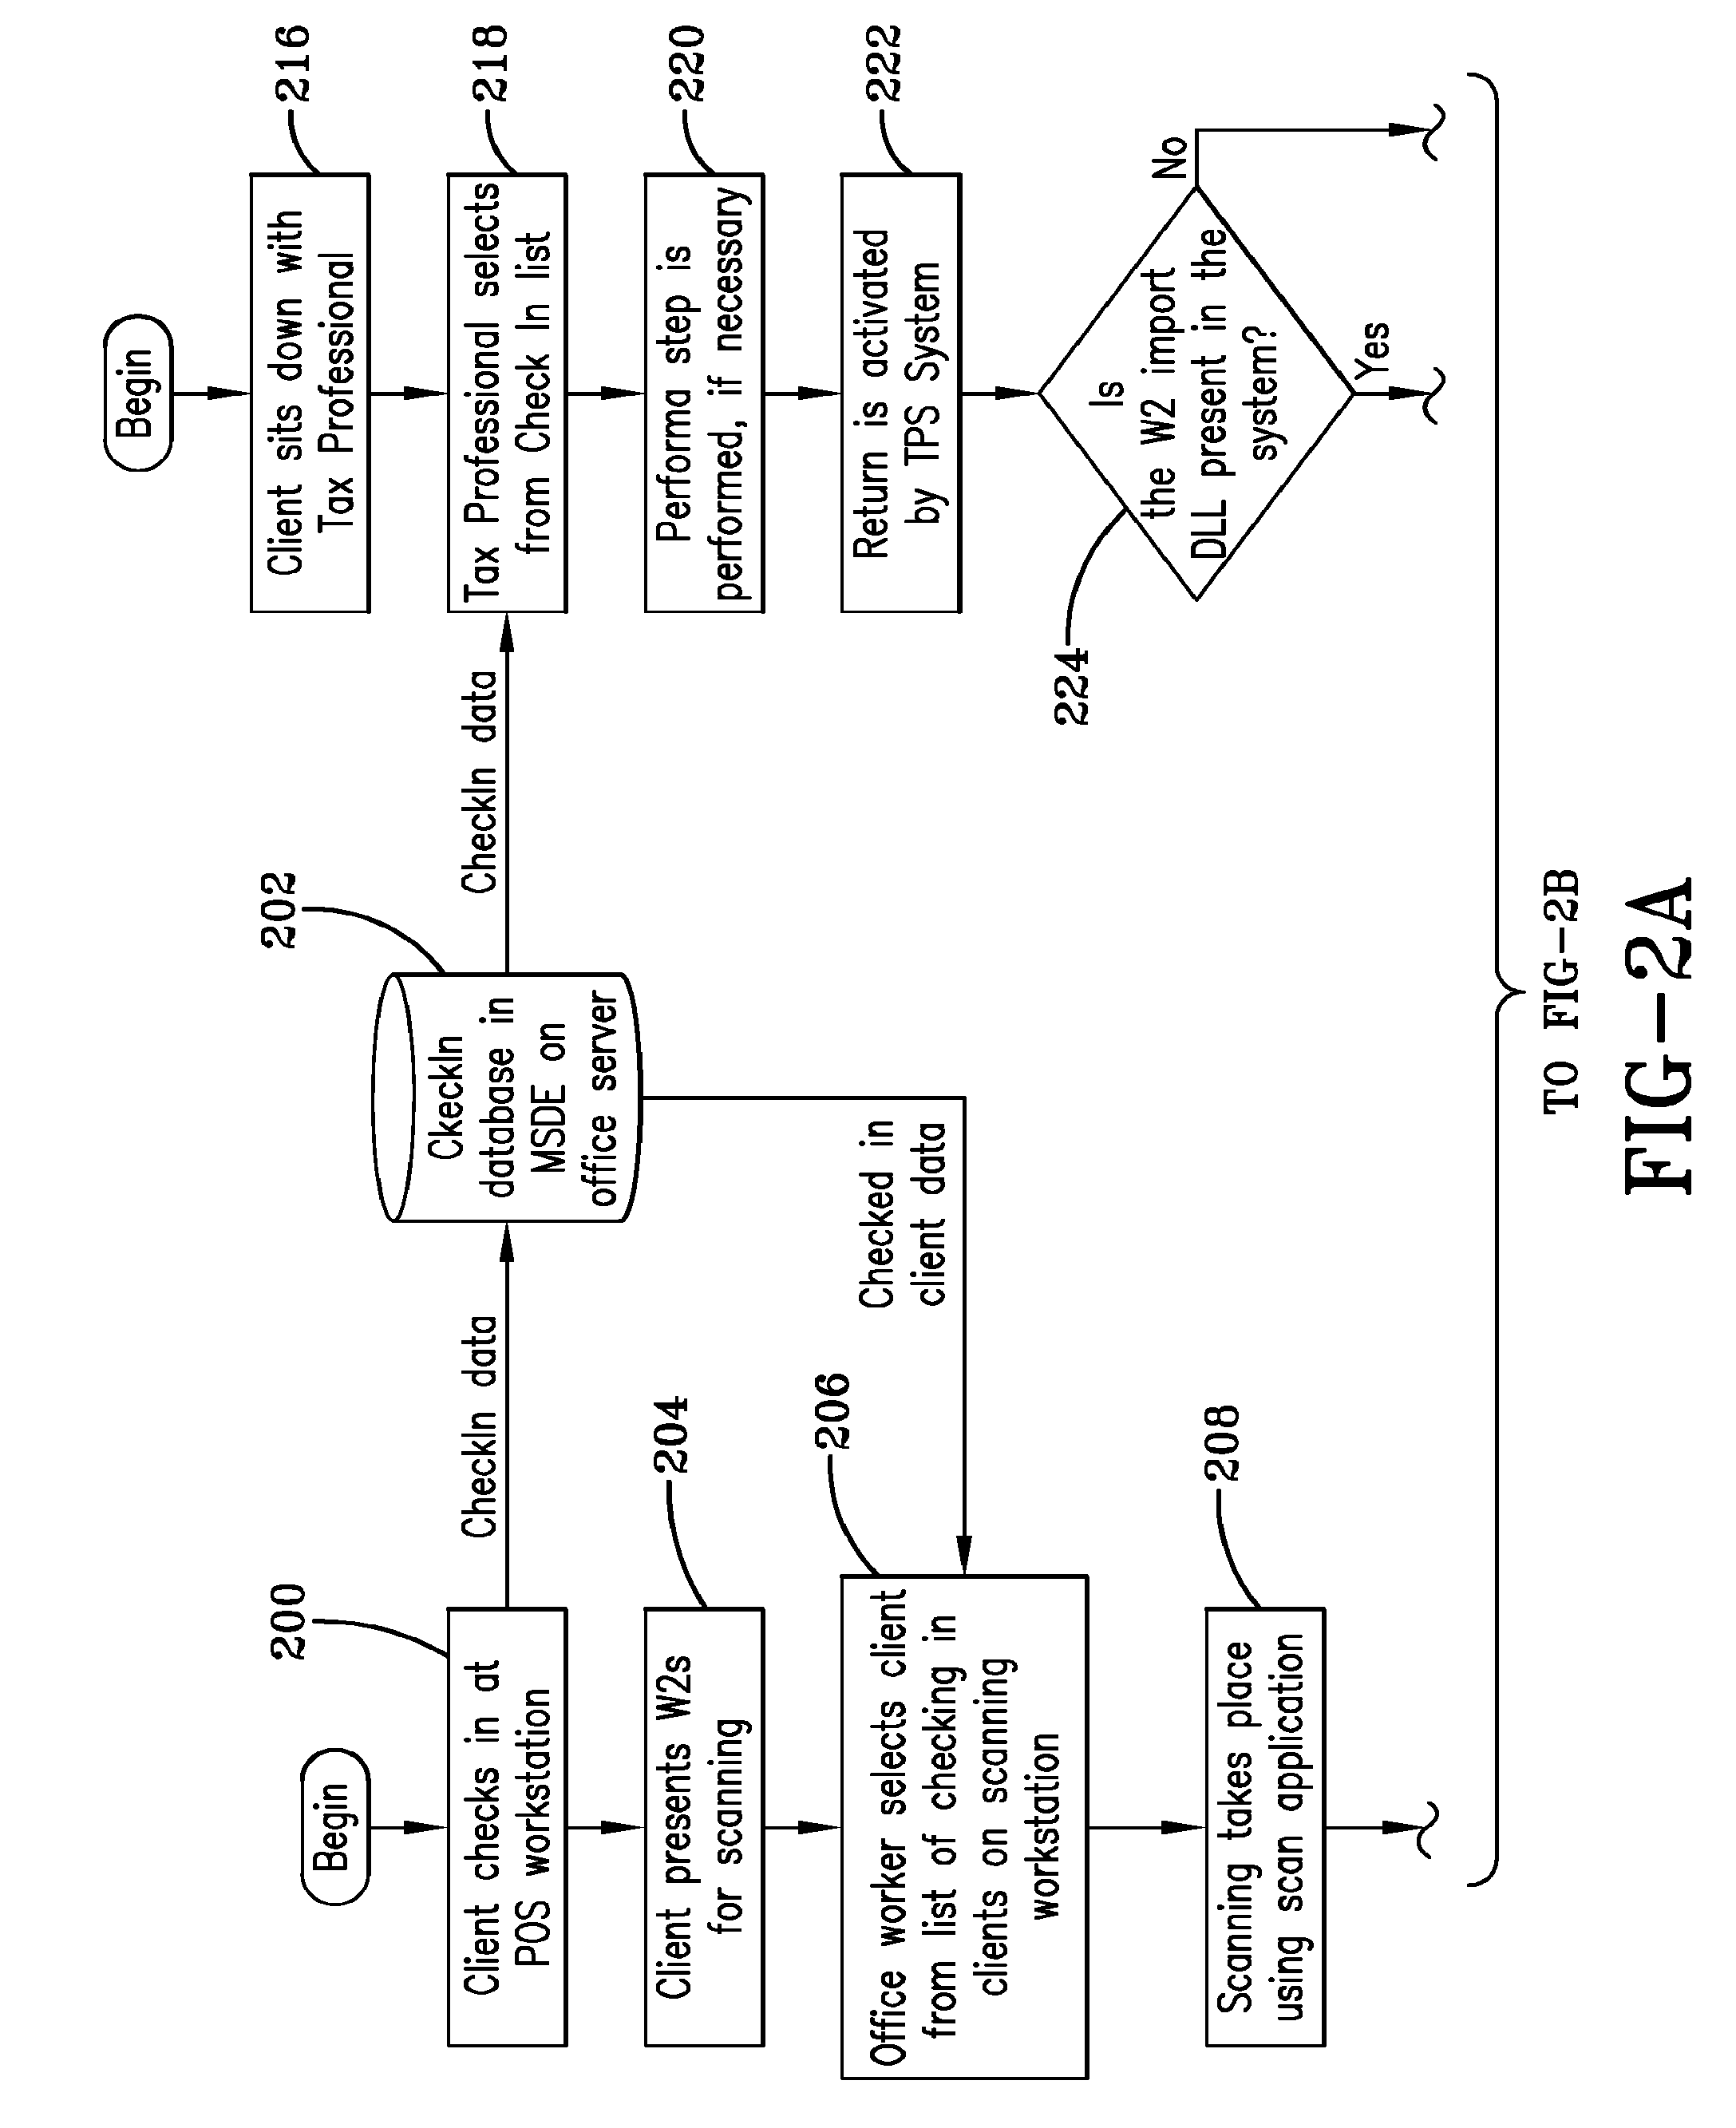 System and method for acquiring tax data for use in tax preparation software